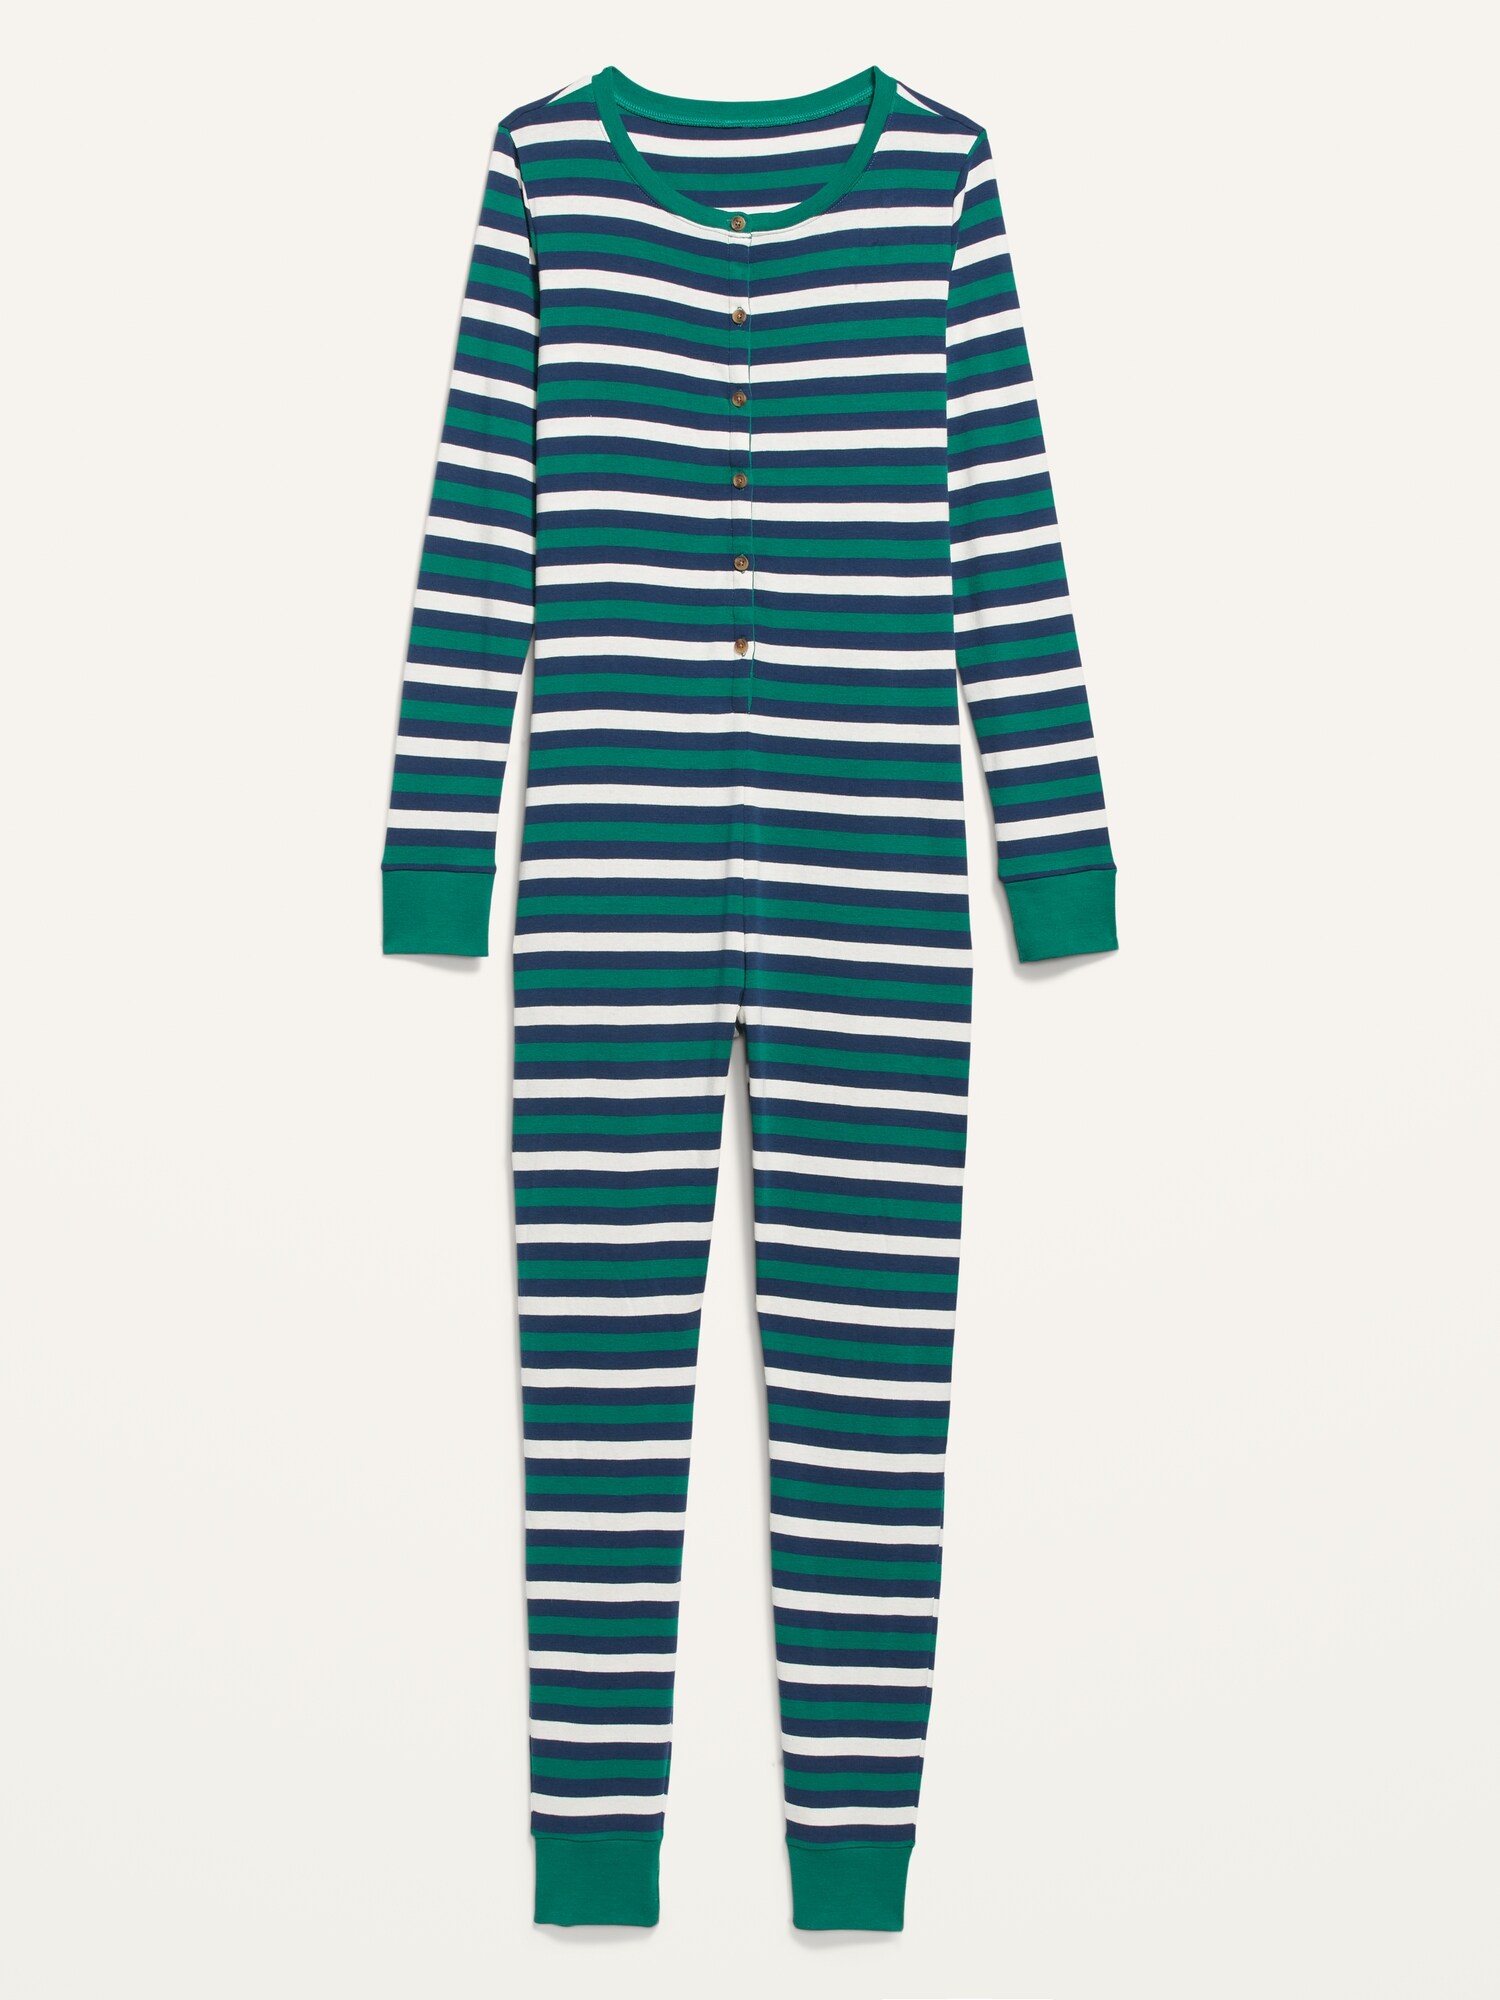 Matching Printed One-Piece Pajamas for Women | Old Navy